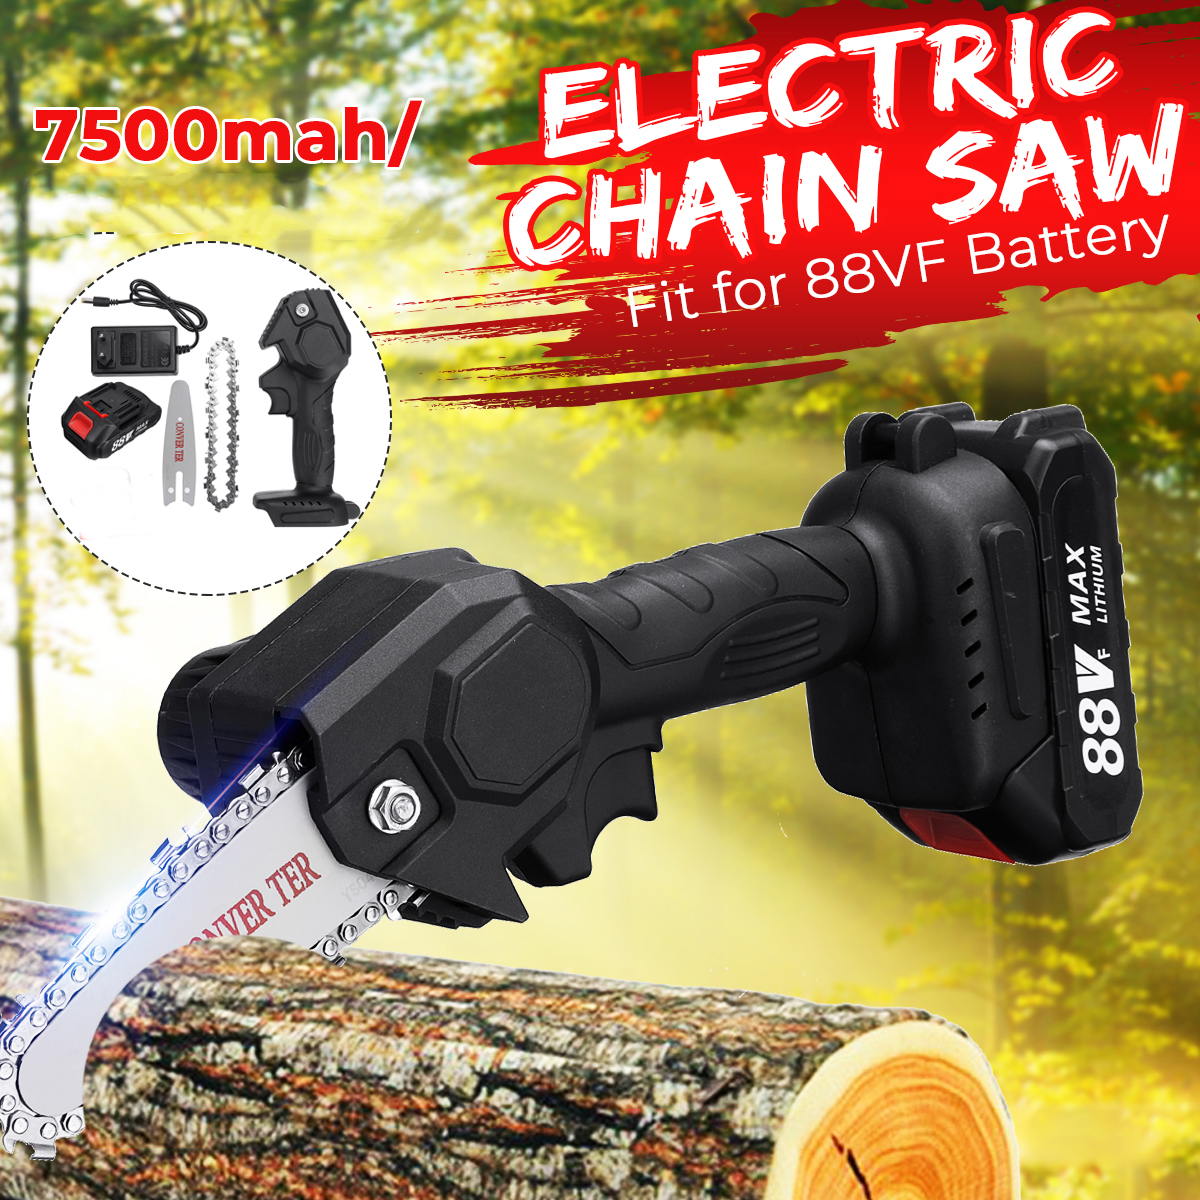 4-Inch-7500mAh-Mini-Electric-Chain-Saw-Pruning-Chainsaw-Cordless-Garden-Tree-Logging-Trimming-Saw-Fo-1798984-1